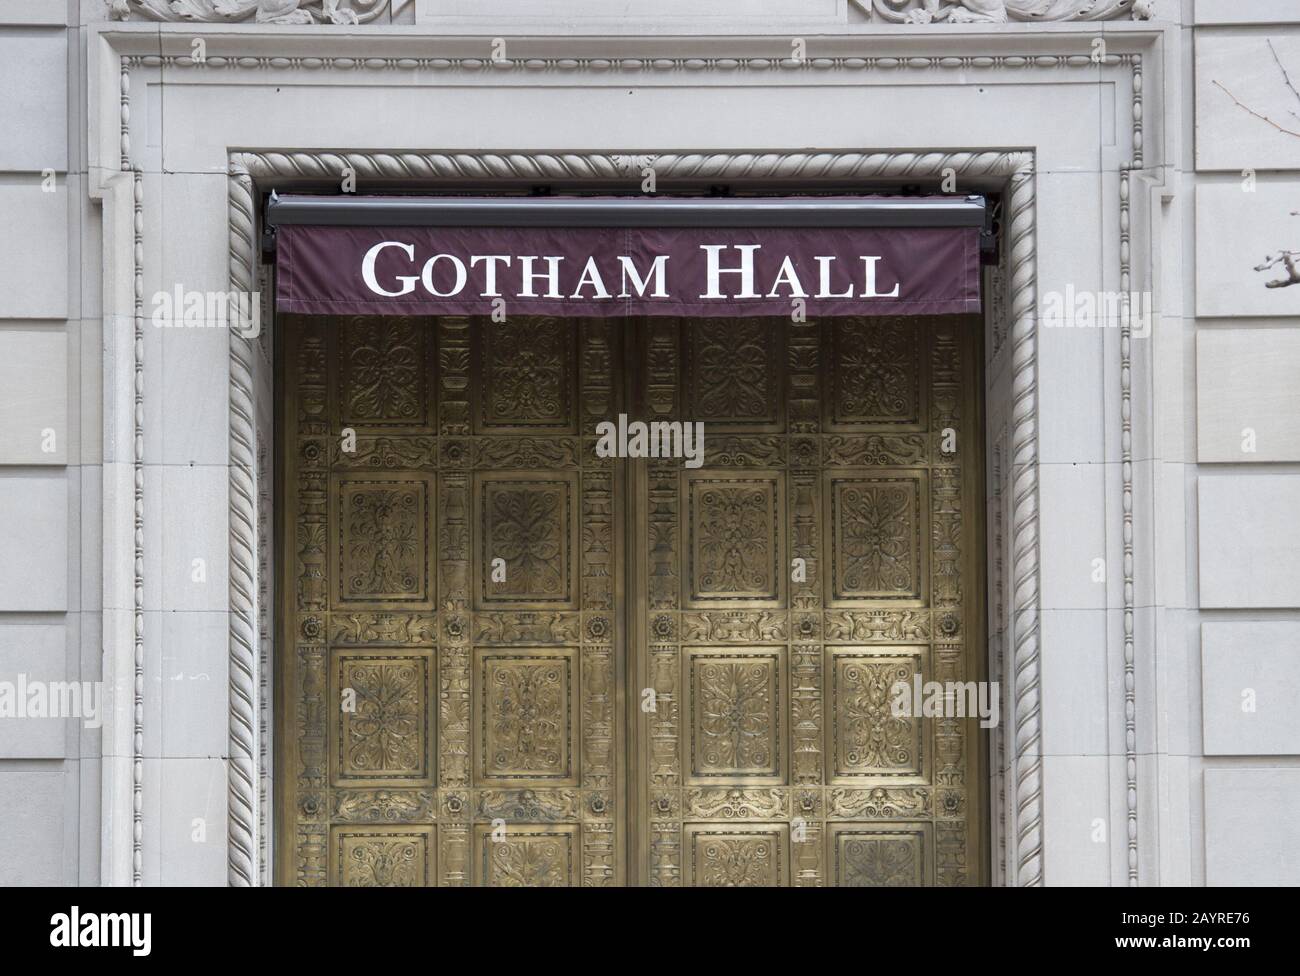 Gotham Hall named after the fictional city of that name. It was best known as the home of the superhero, Batman, and his allies and foes. NY City Stock Photo